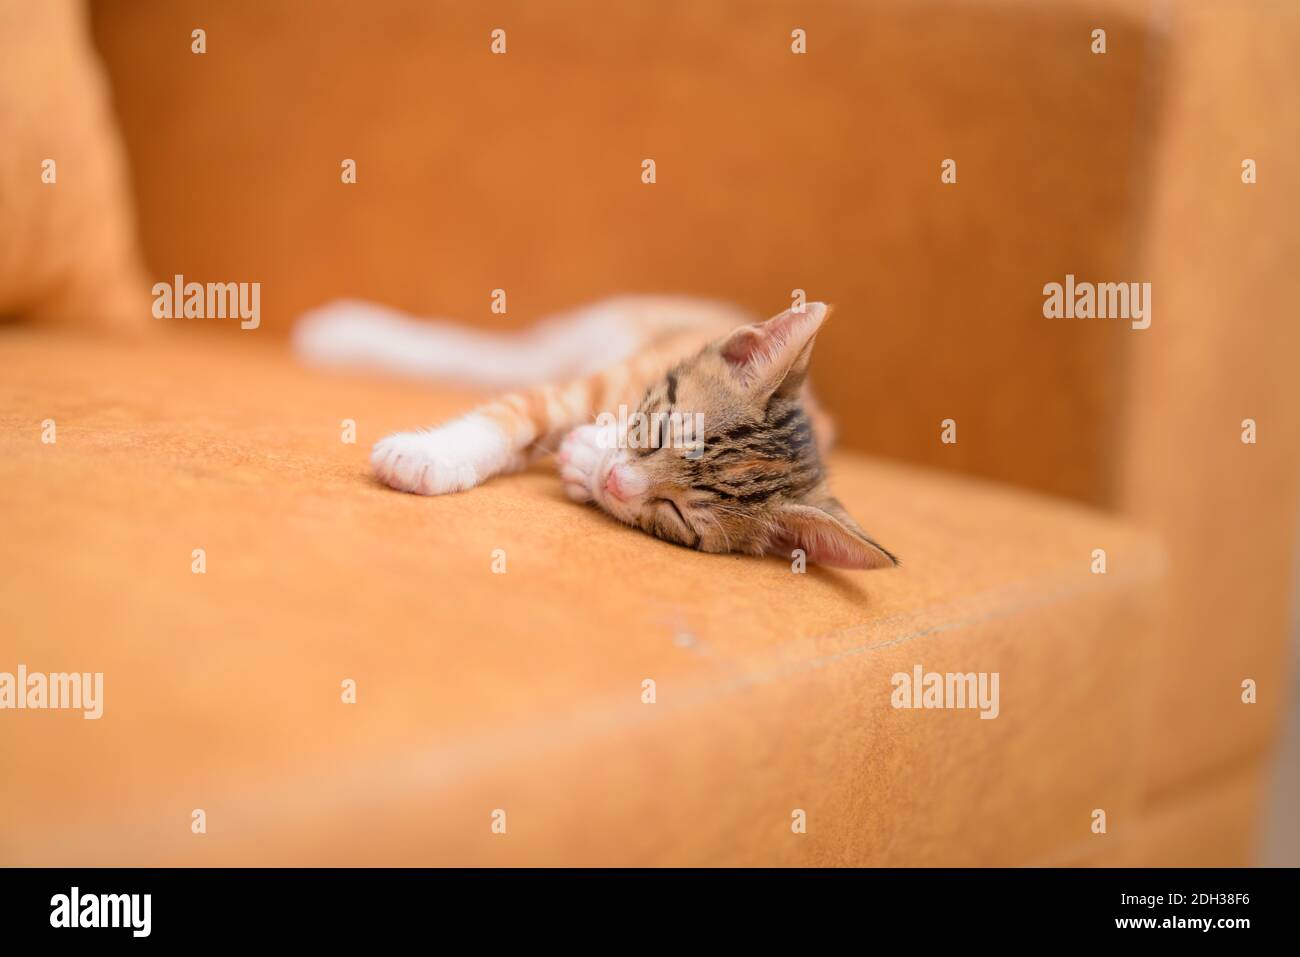 Two months old tabby kitten sleeping on blurry background Stock Photo